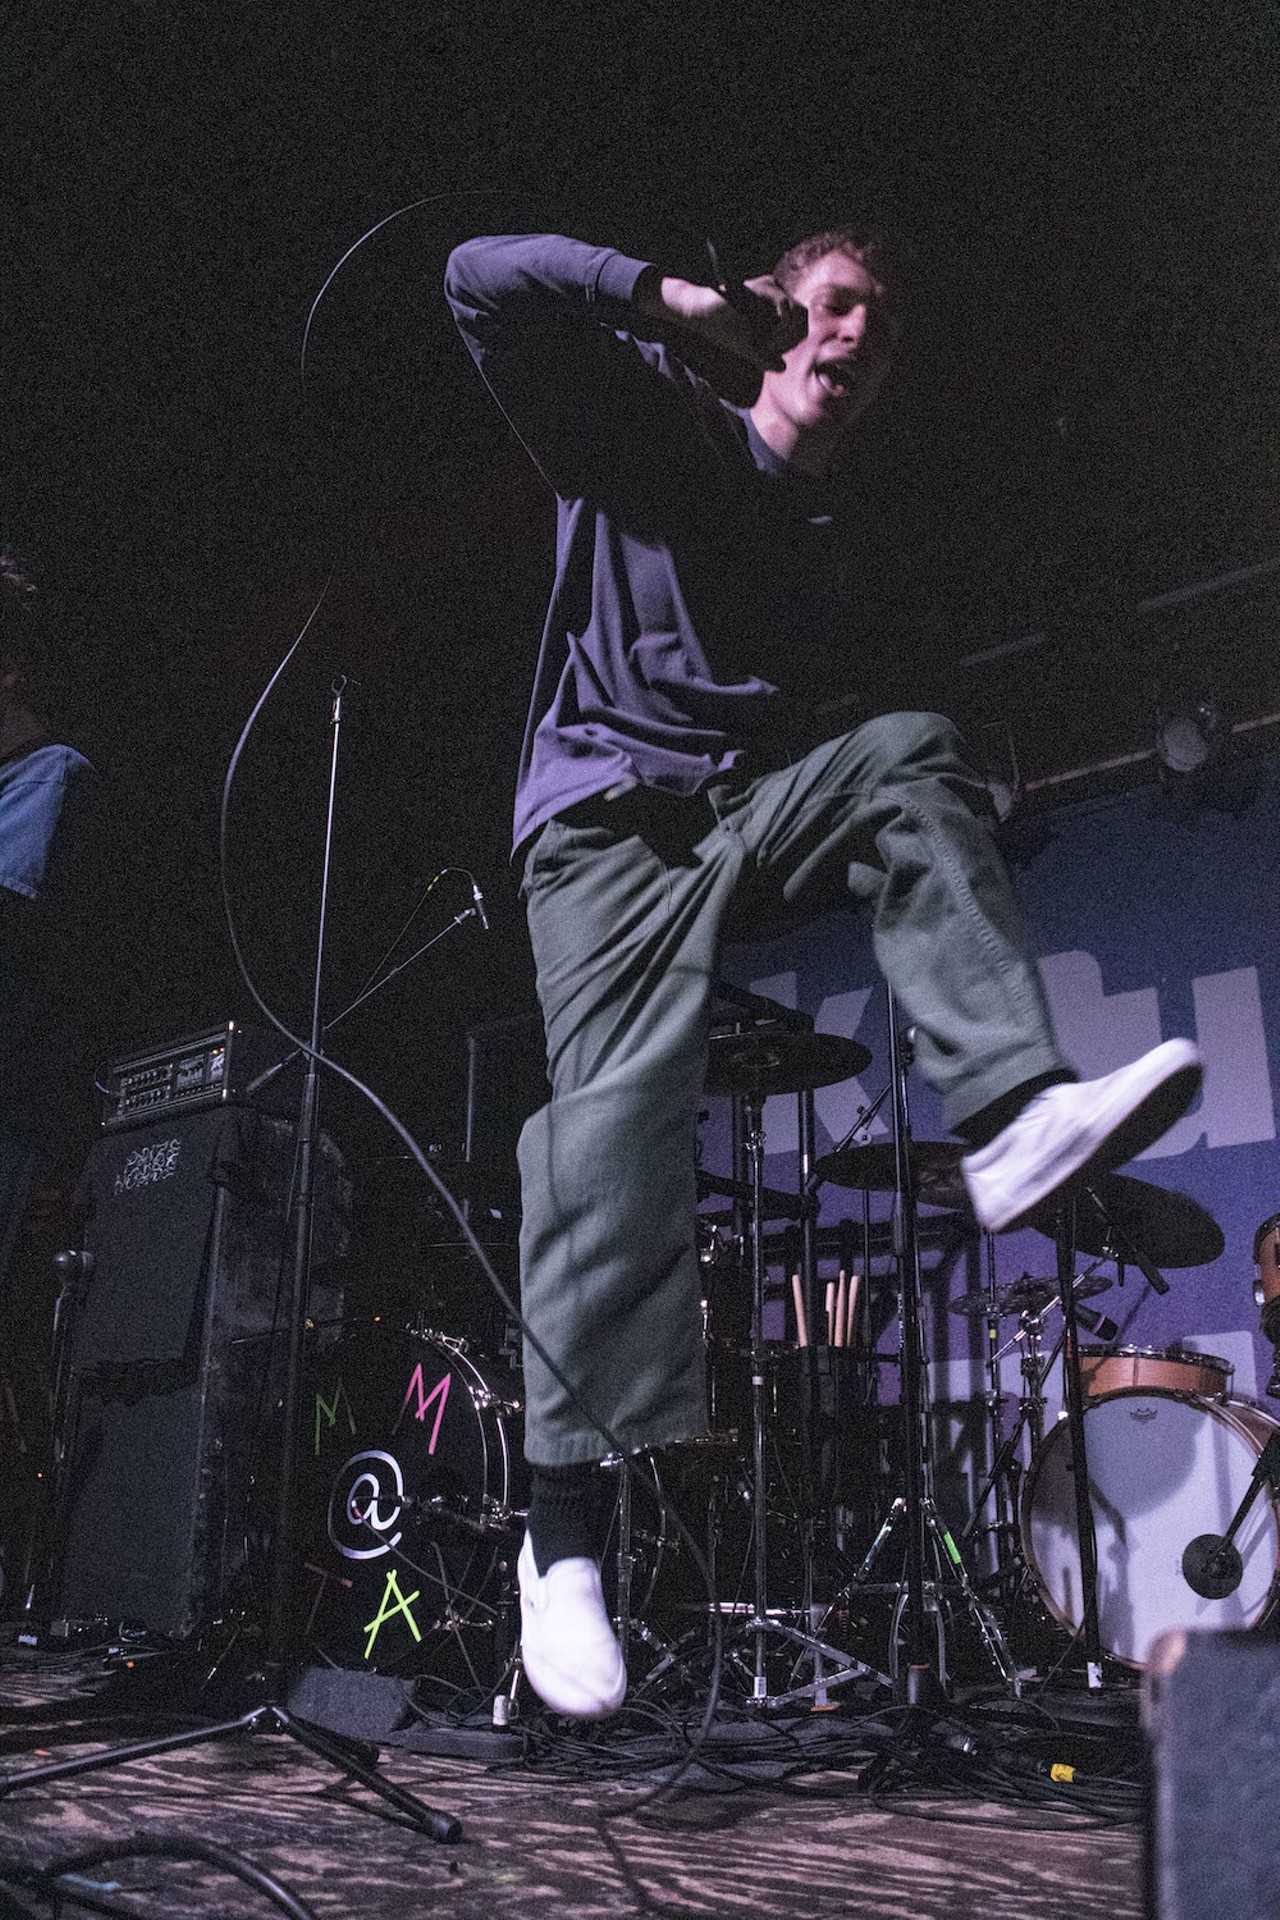 Review: Meet Me @ The Altar among openers who stole the show when Knuckle Puck played Ybor City last weekend